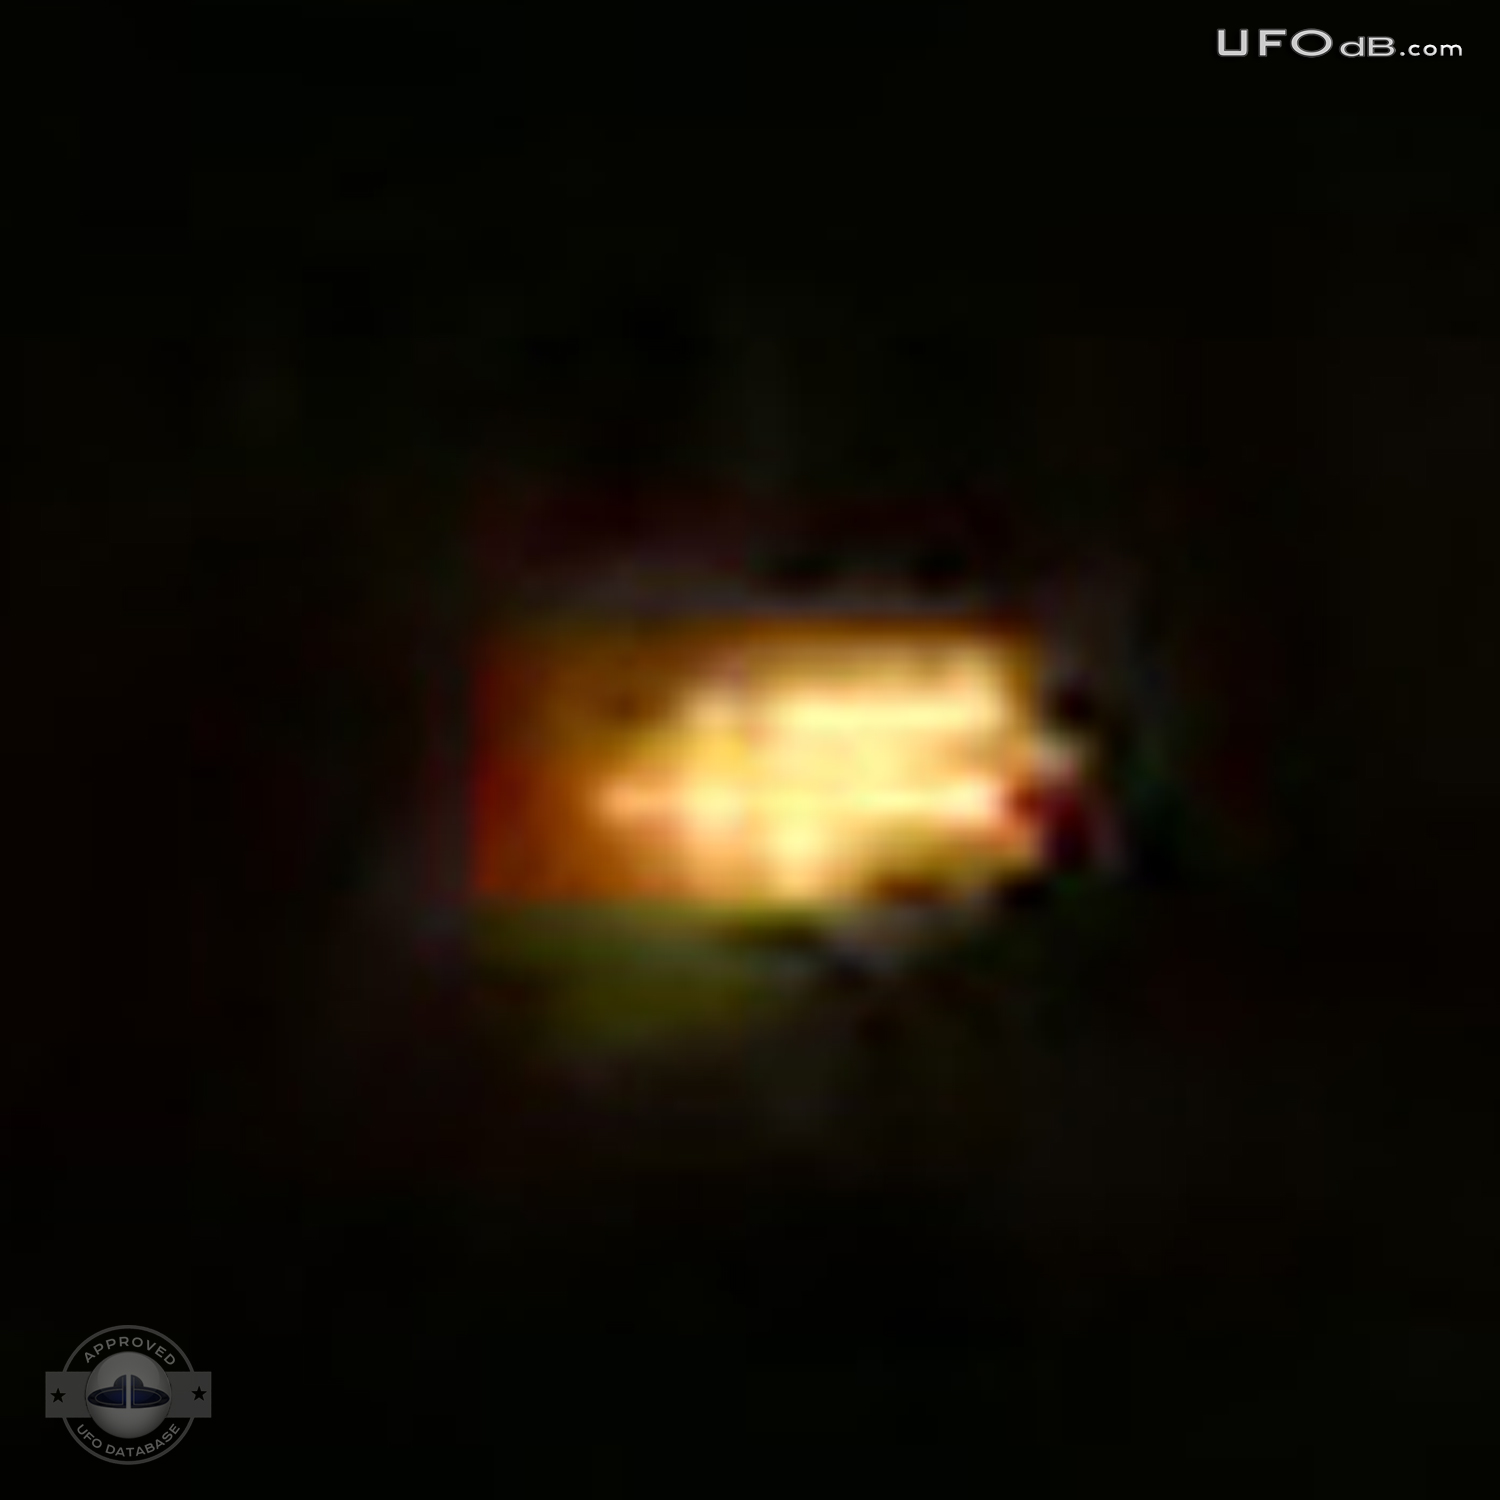 Too slow to be an airplane - UFO picture - South Africa January 1 2011 UFO Picture #278-3